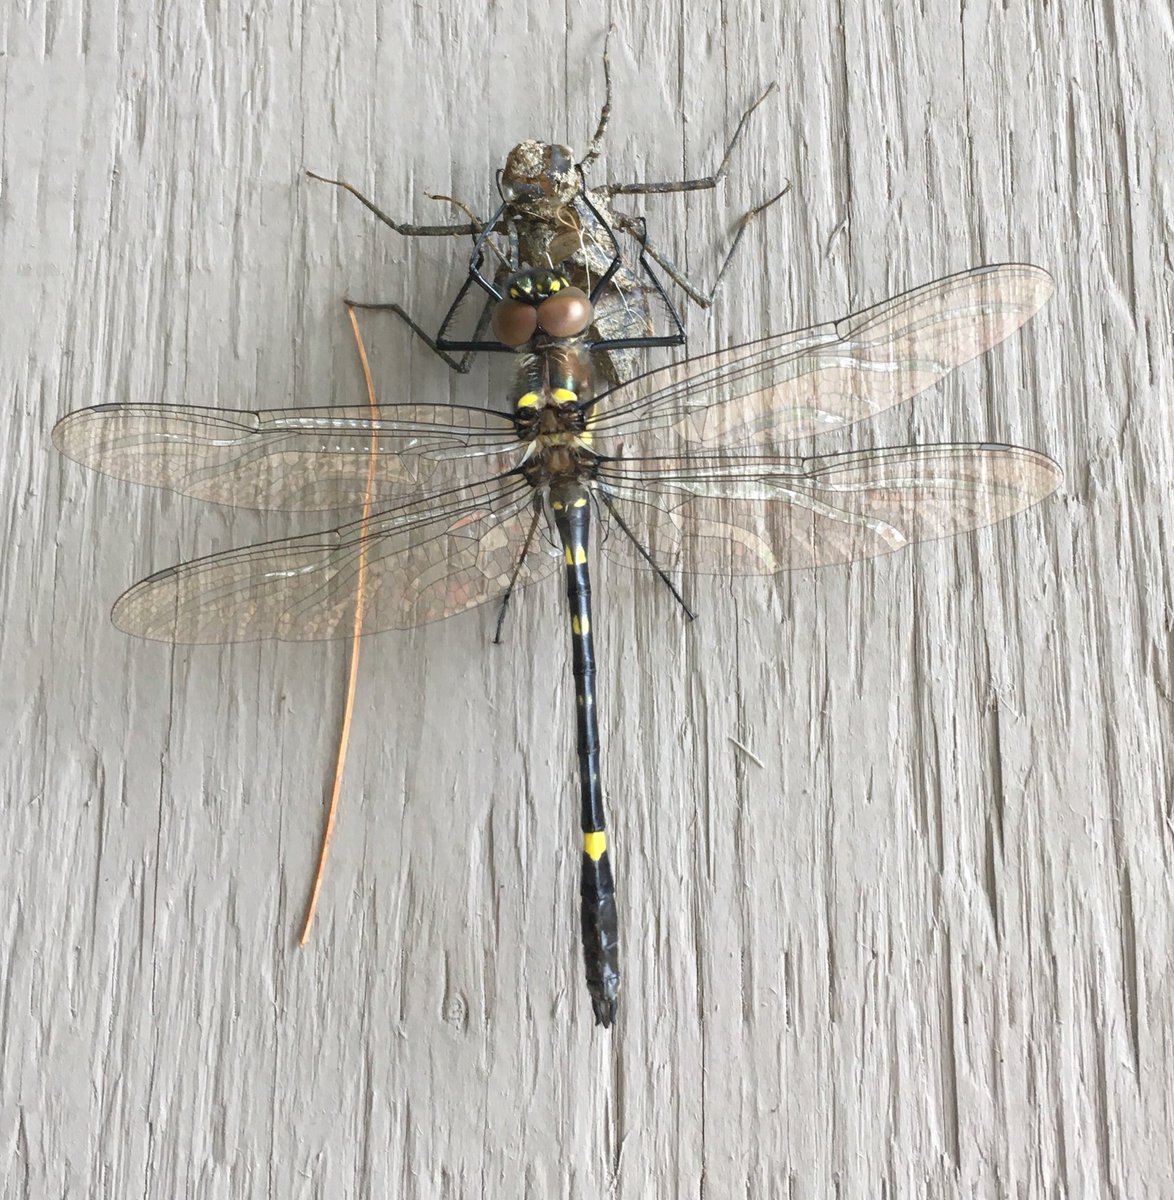 #TodayILearned that some #dragonfly nymphs can spend up to four years in freshwater before emerging to become dragonflies. Here is one I saw today.